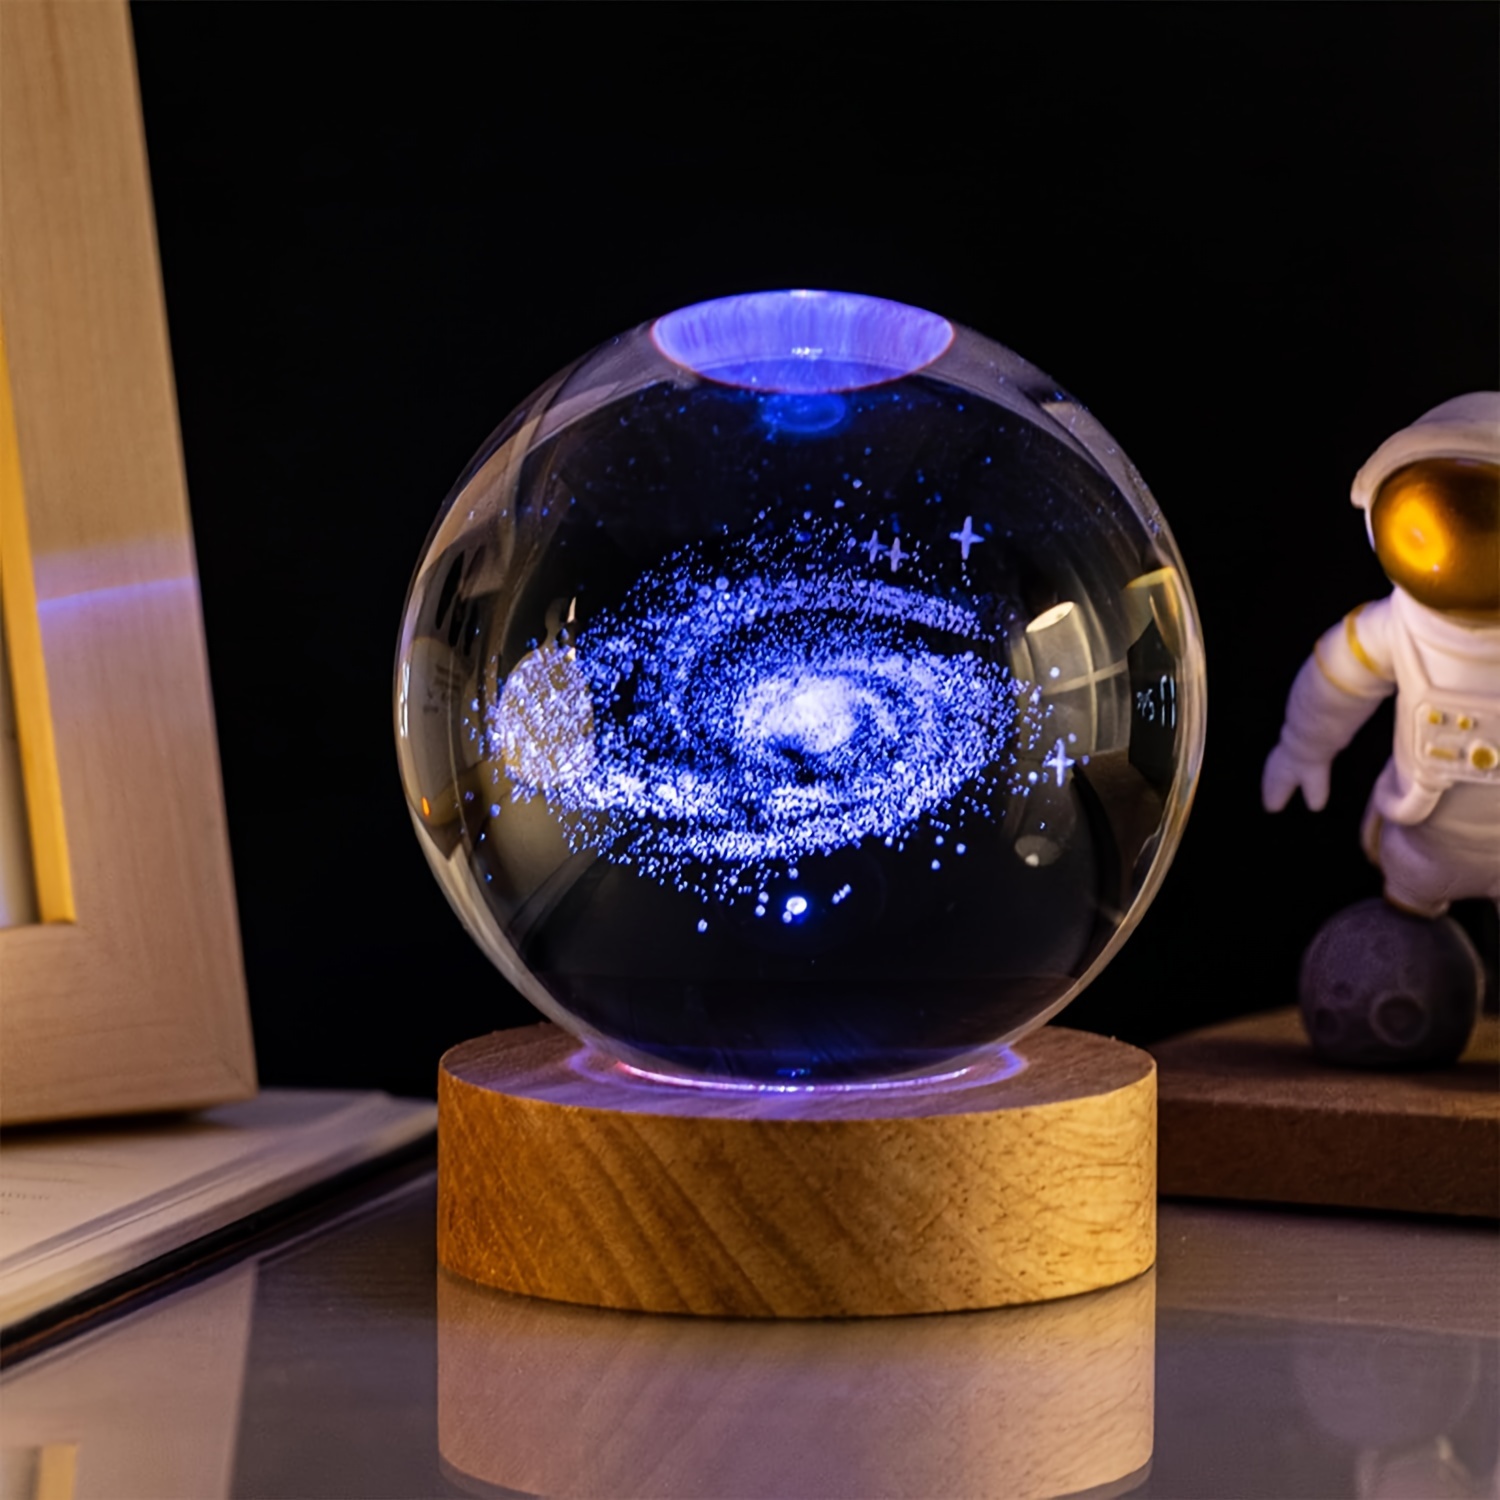 

1pc 3d Led Crystal Ball Night Light With 16 Color Gradient, Modern Style, Glass Laser Engraving, Usb Powered With Push-button Switch, Wooden Base, Perfect For Birthday And Holiday Gifts